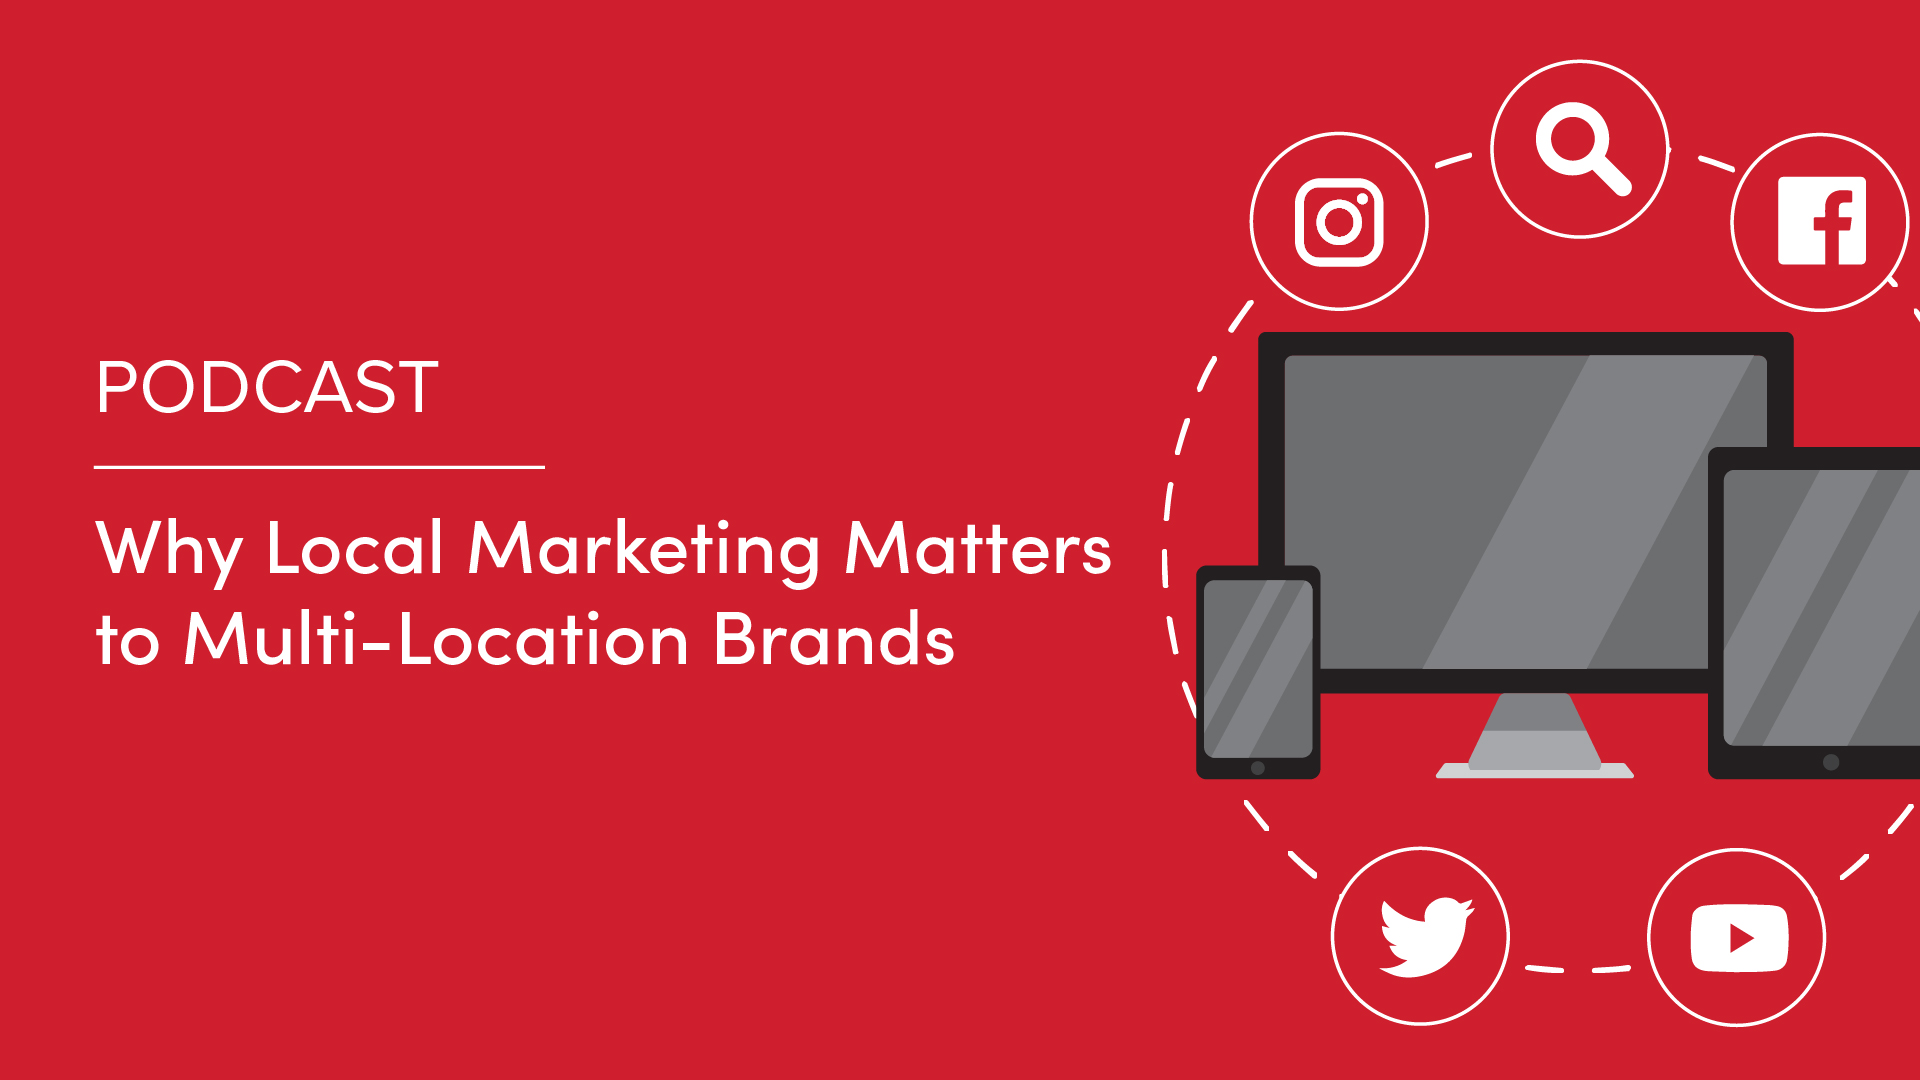 Podcast: Why Local Marketing Matters to Multi-Location Brands